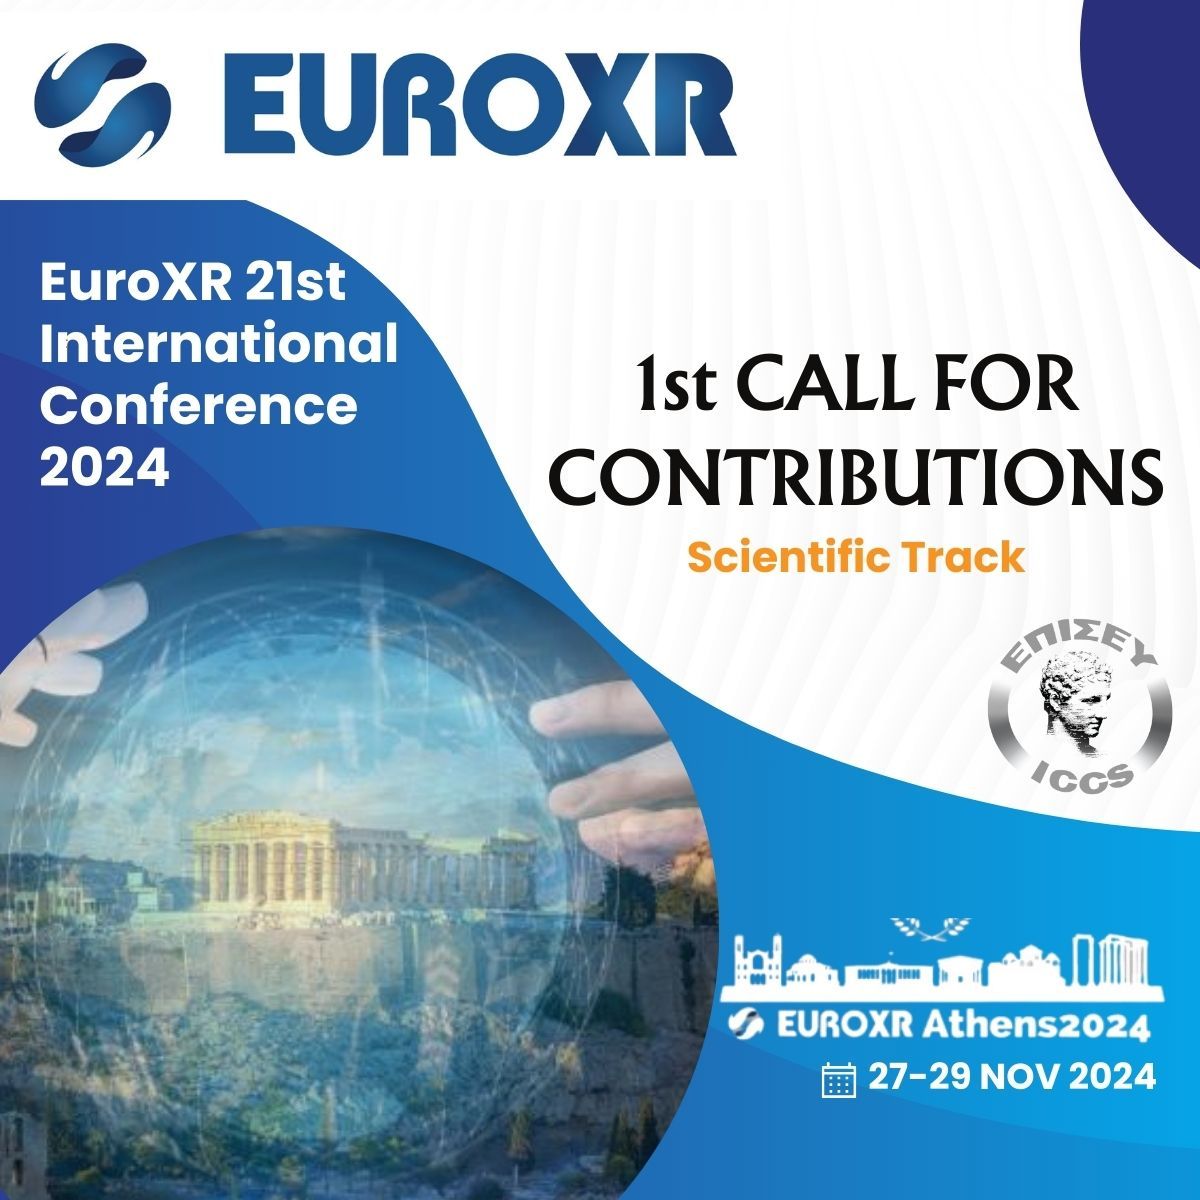 🚩Passionate about #VR, #XR, or #AR? The 21st @Euro_XR International Conference is coming to Greece on November 27-29, 2024! 👉1st Call for Submissions: Submit your abstract on topics like technologies, human factors & applications at go.iccs.gr/avenmv #EuroXR2024 #EuroXR